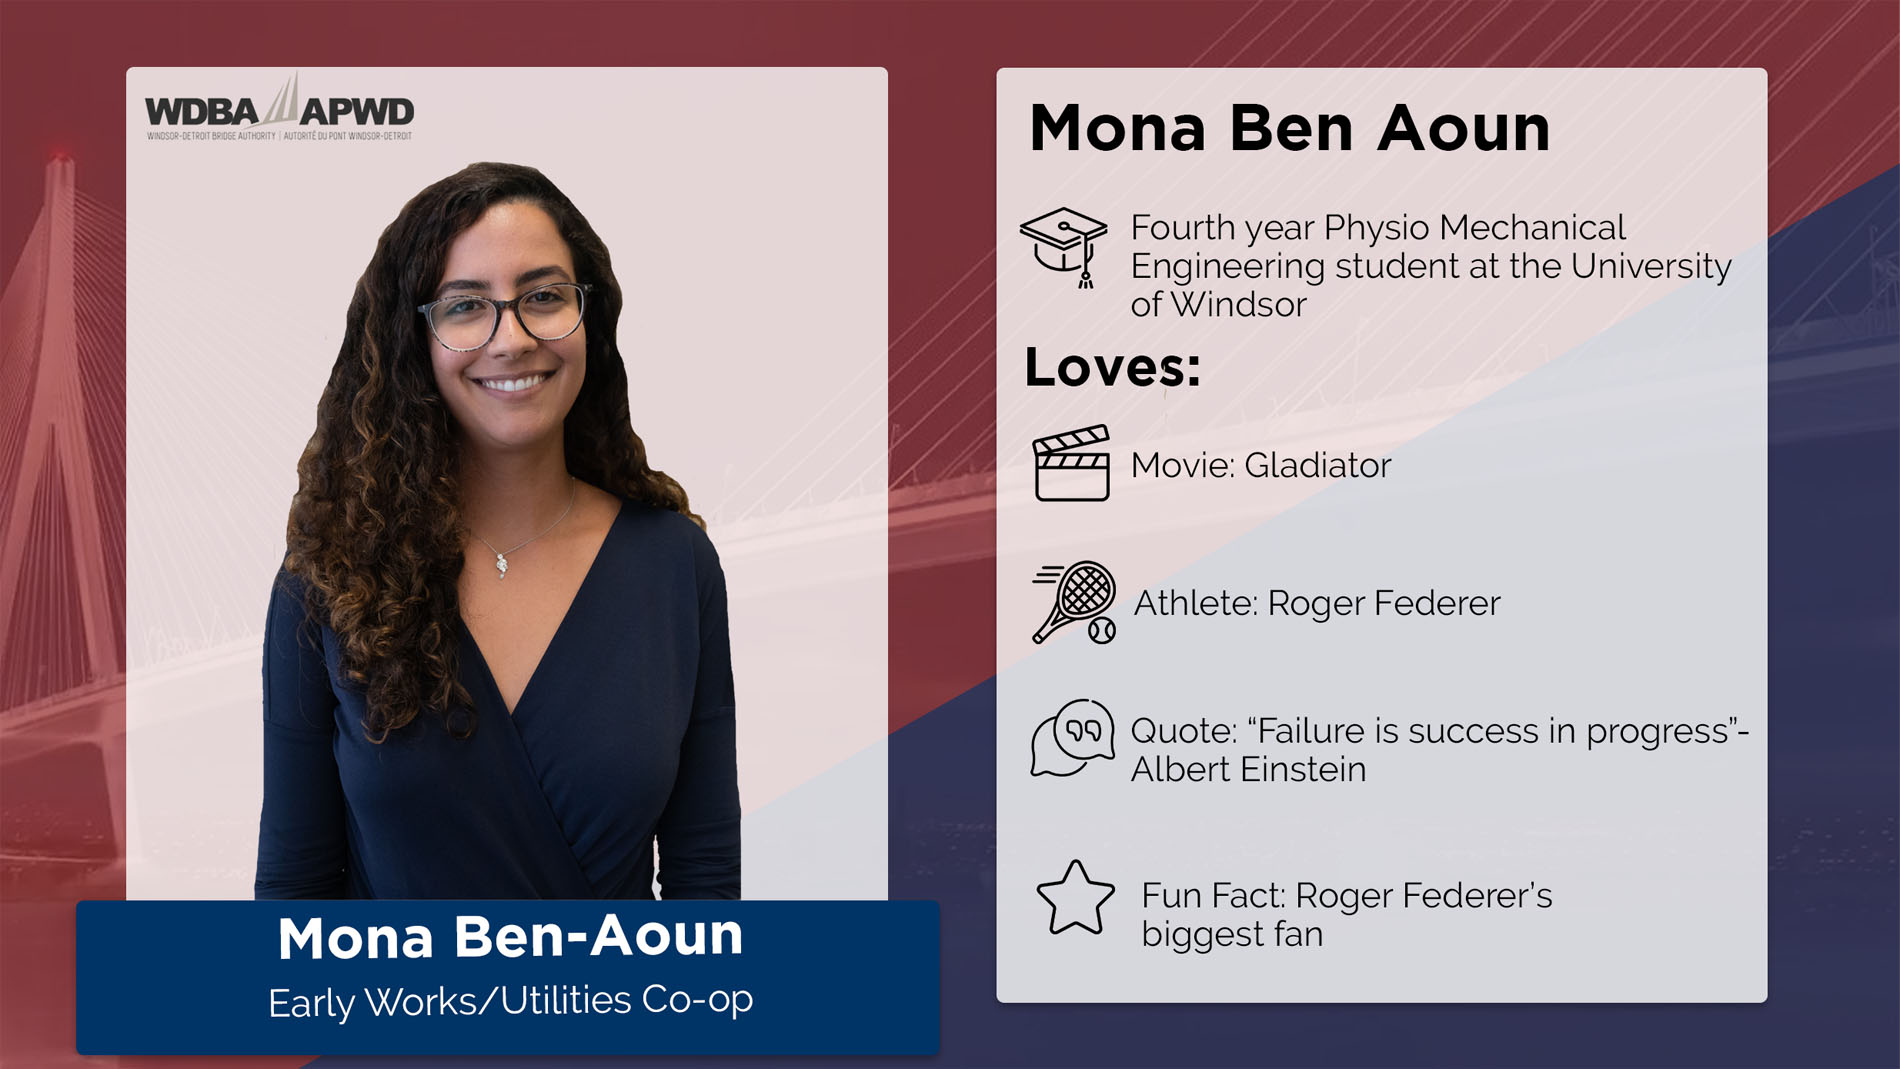 Mona Ben Aoun, Early Works/Utilities Co-op. Fourth year PHysio Mechanical Engineering student at the University of Windsor. Loves: Movie: Gladiator. Athlete: Roger Federer. Quote: "Failure is success in progress" - Albert Einstein. Fun Fact: Roger Federer's biggest fan. 